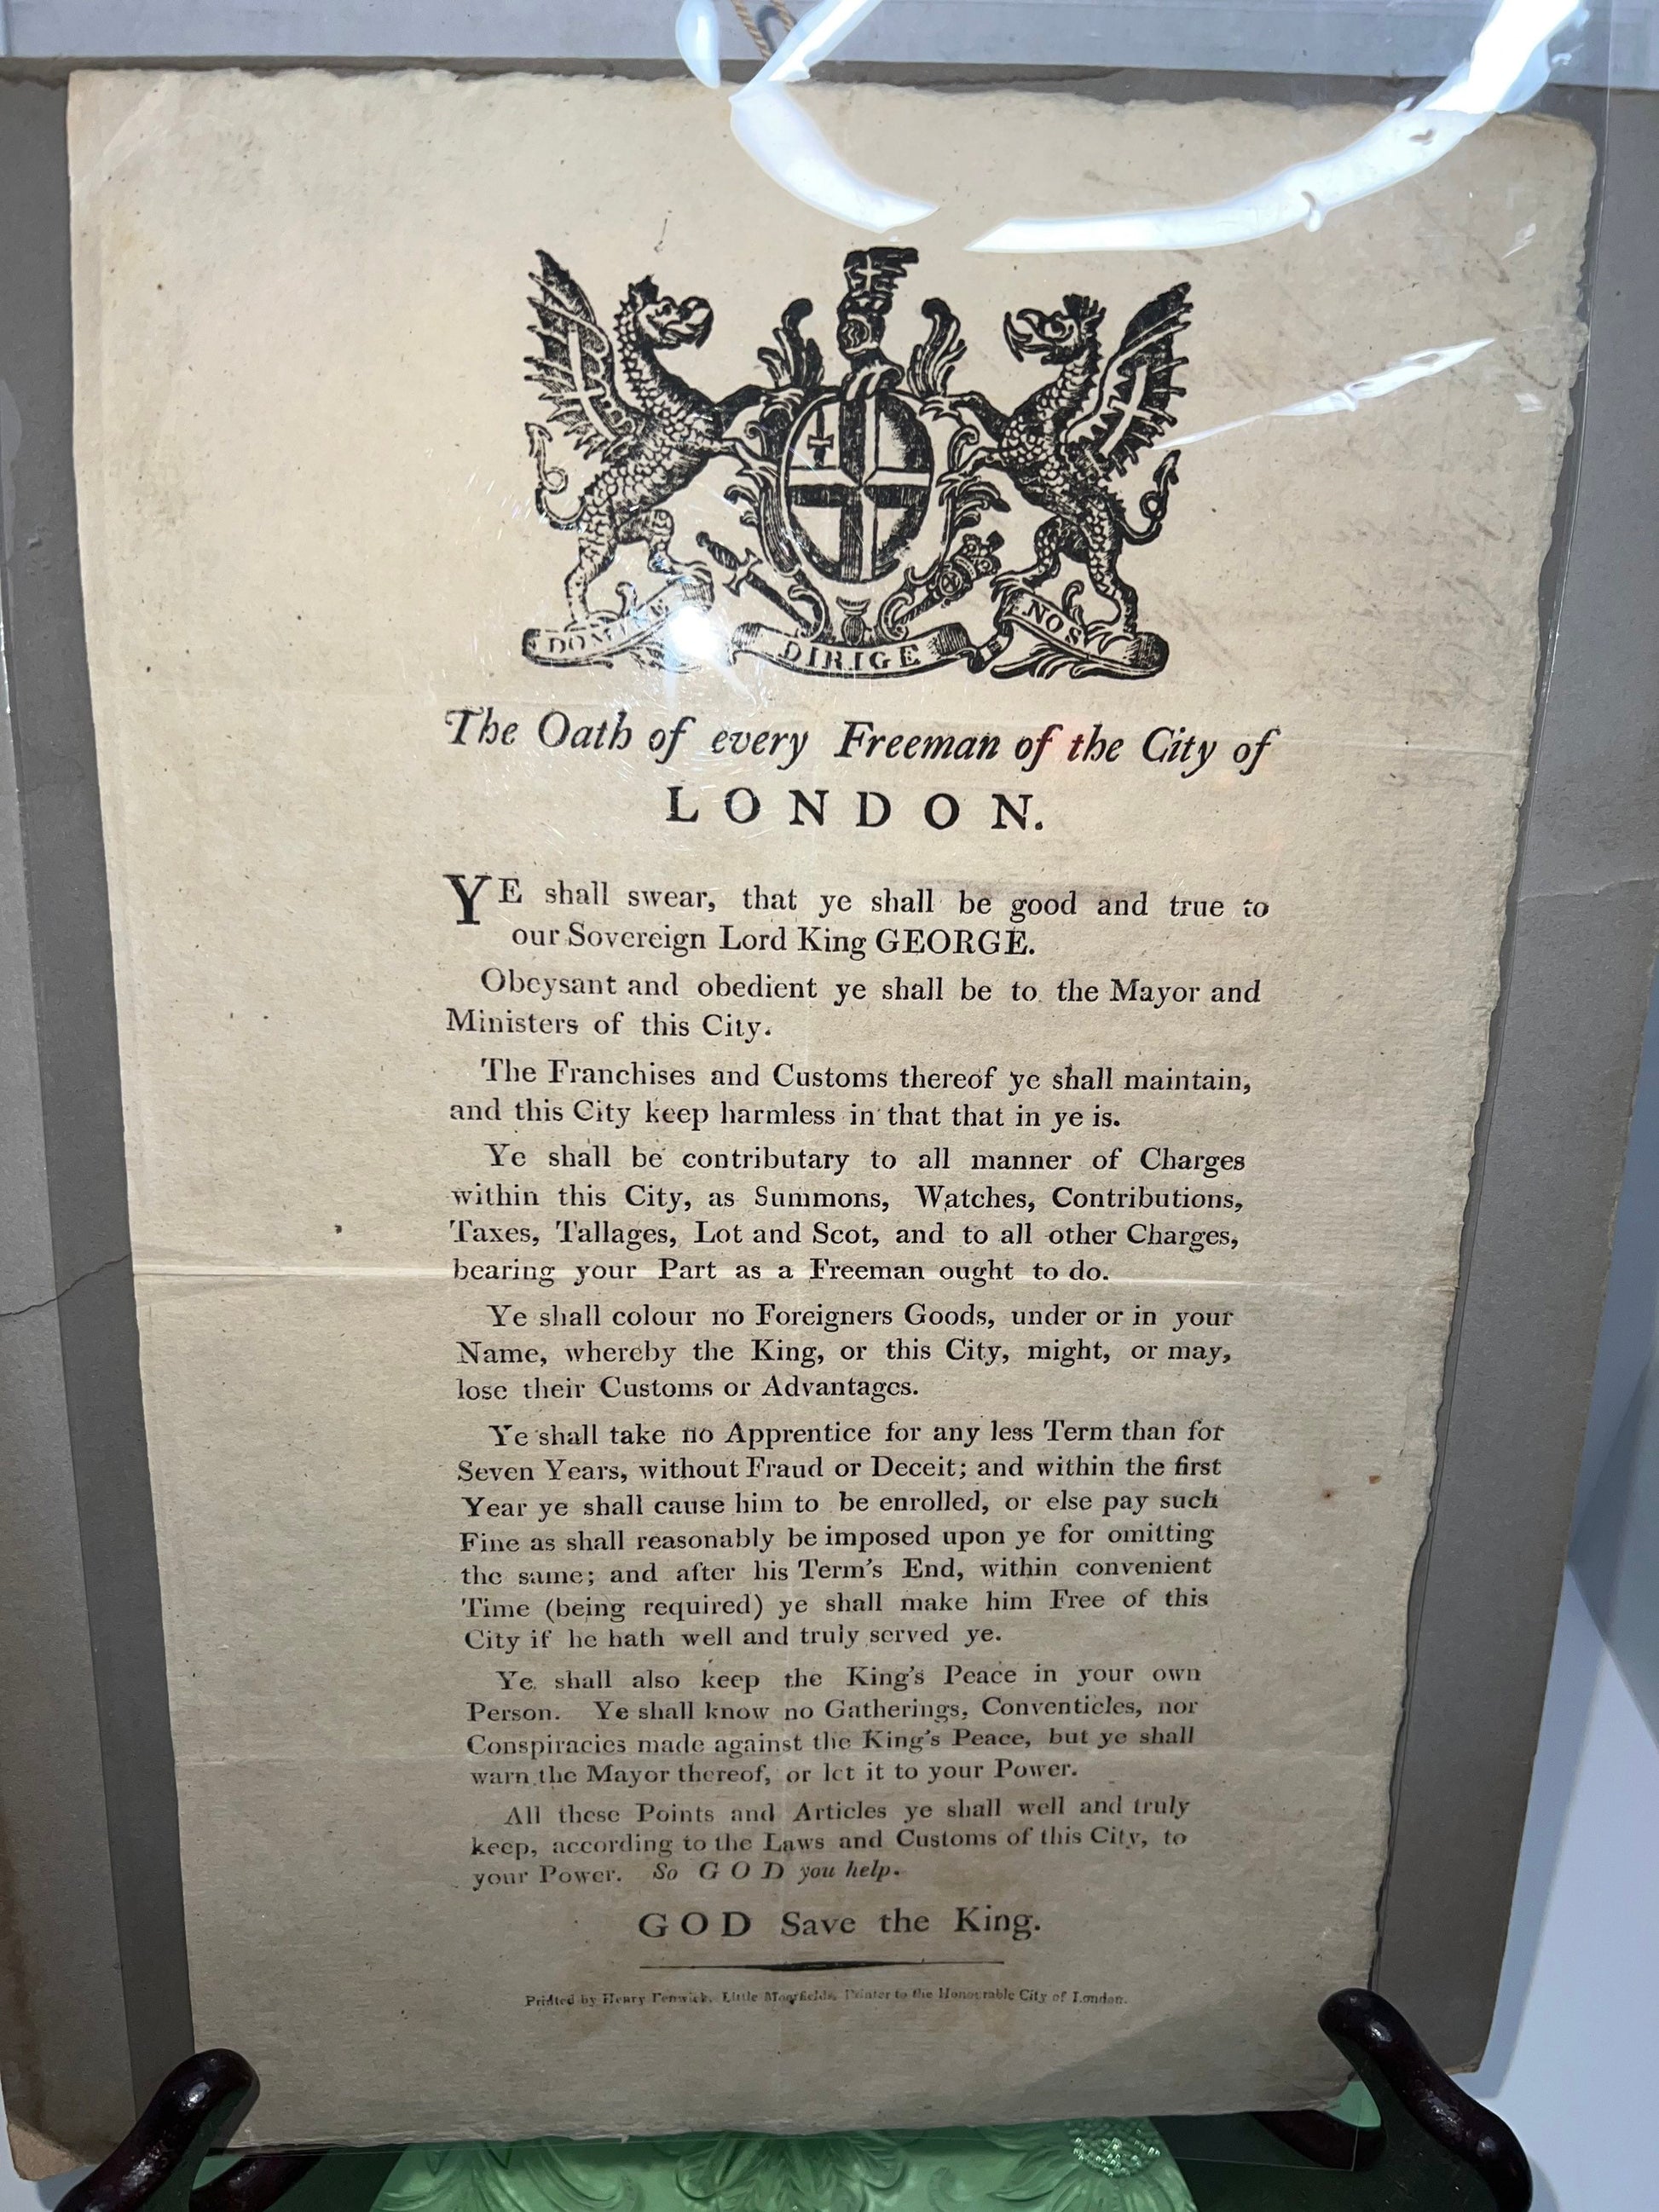 Antique 1817 London broadside oath of every freeman of the city ,lord king George